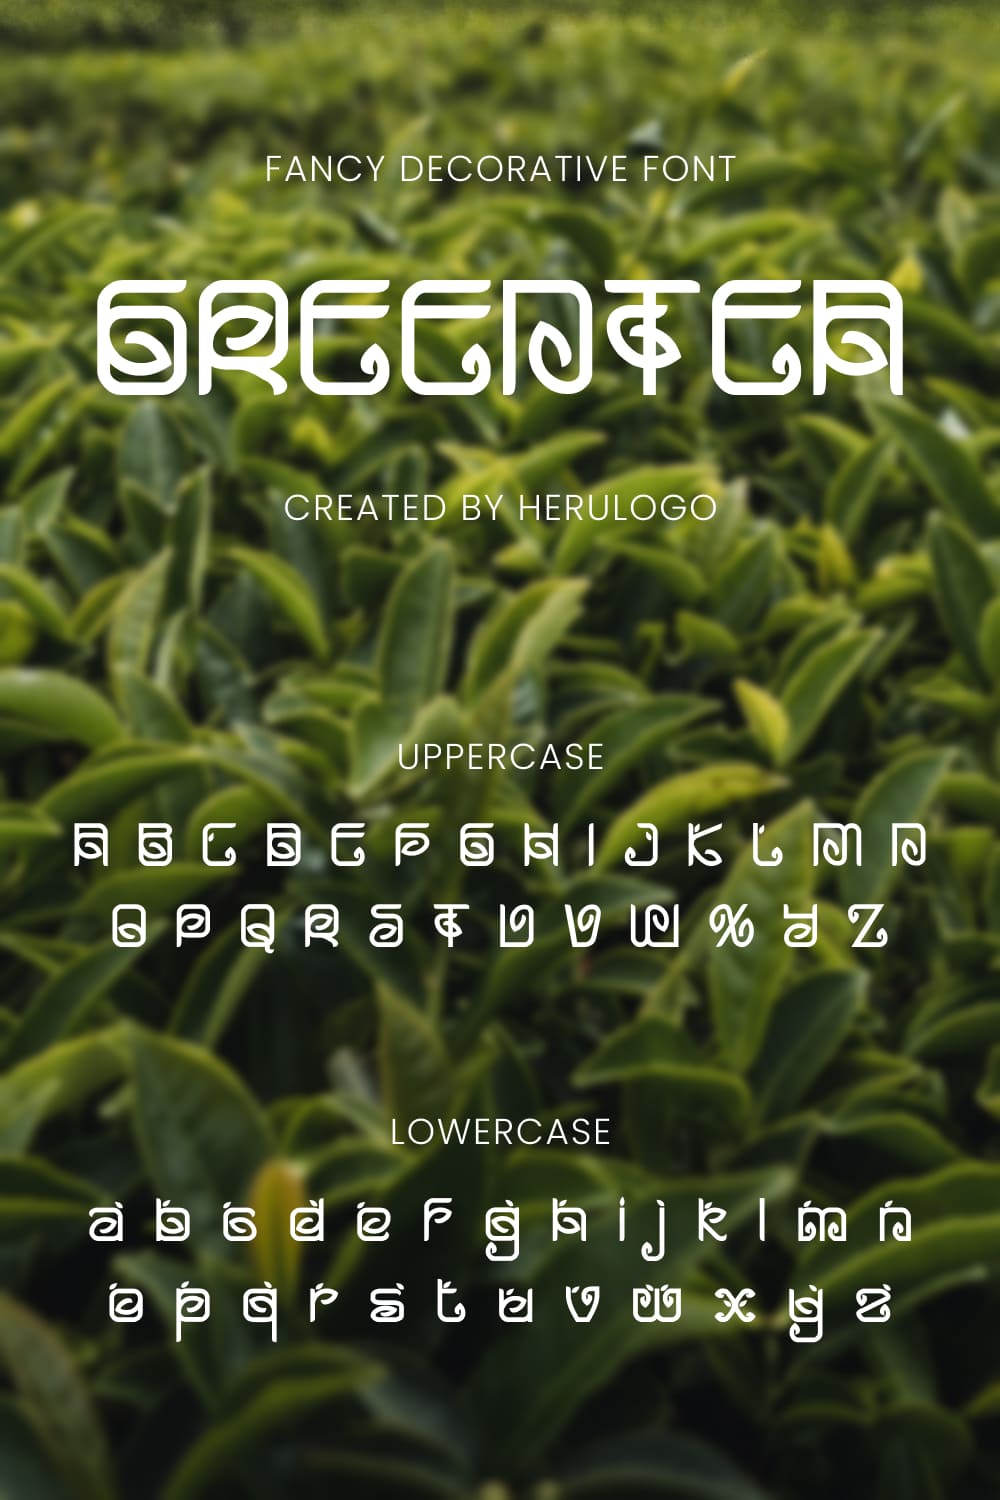 Greentea Free Patrick Font MasterBundles Pinterest preview with uppercase and lowercase.